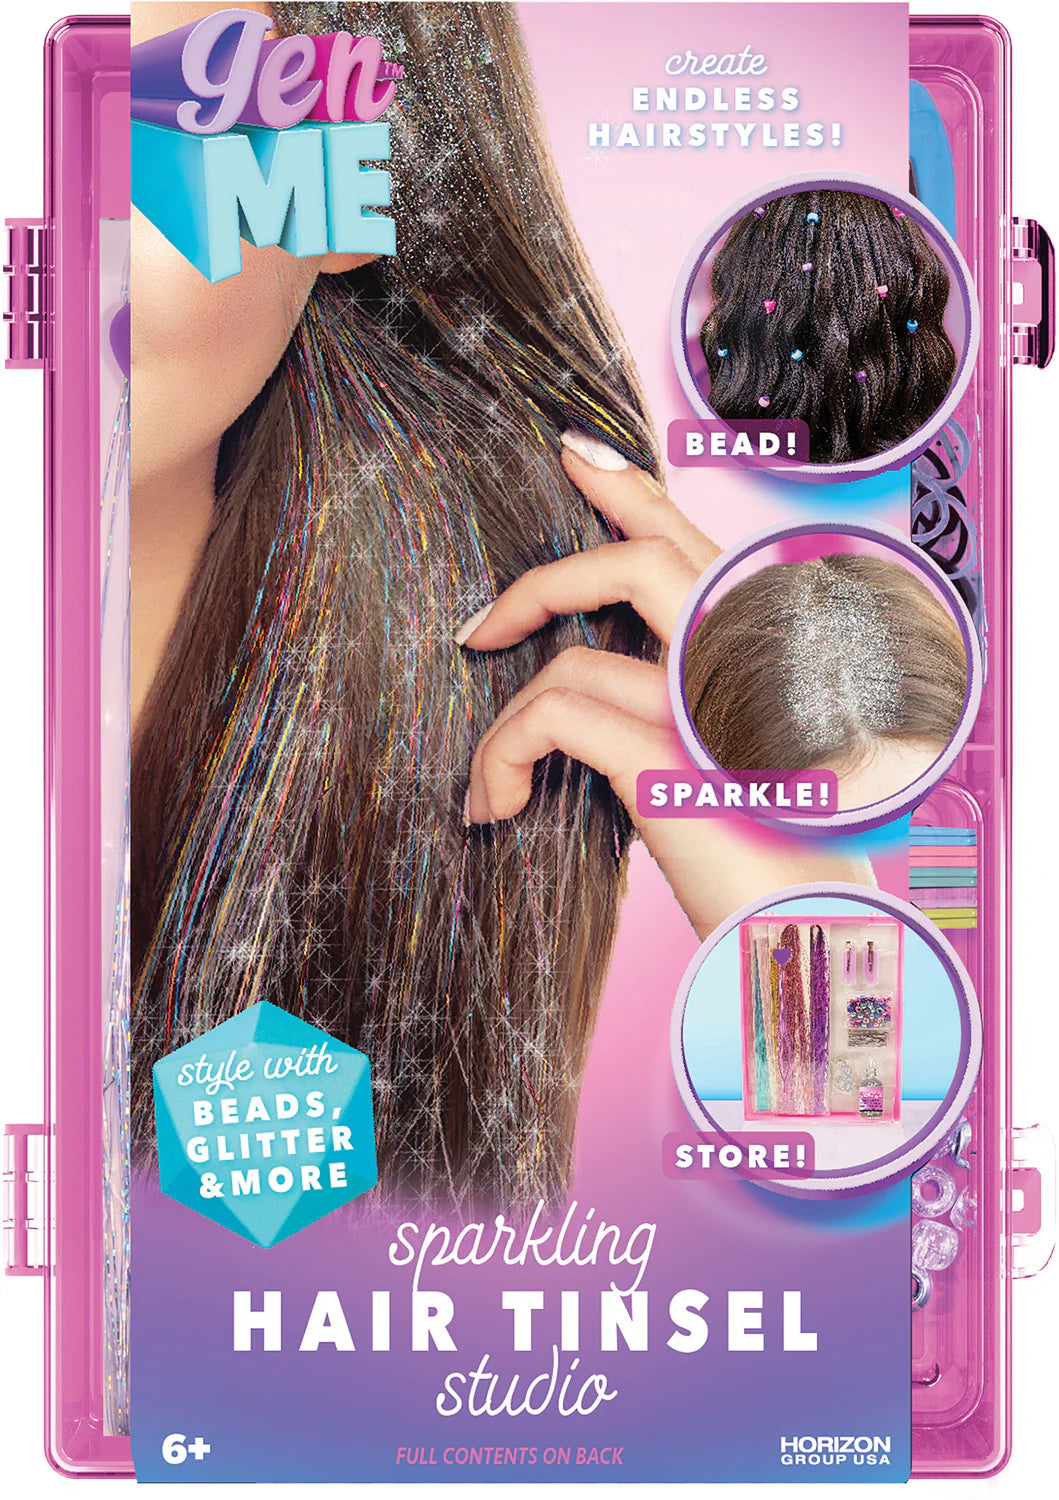 Genme Hair Tinsel Studio Preview #2